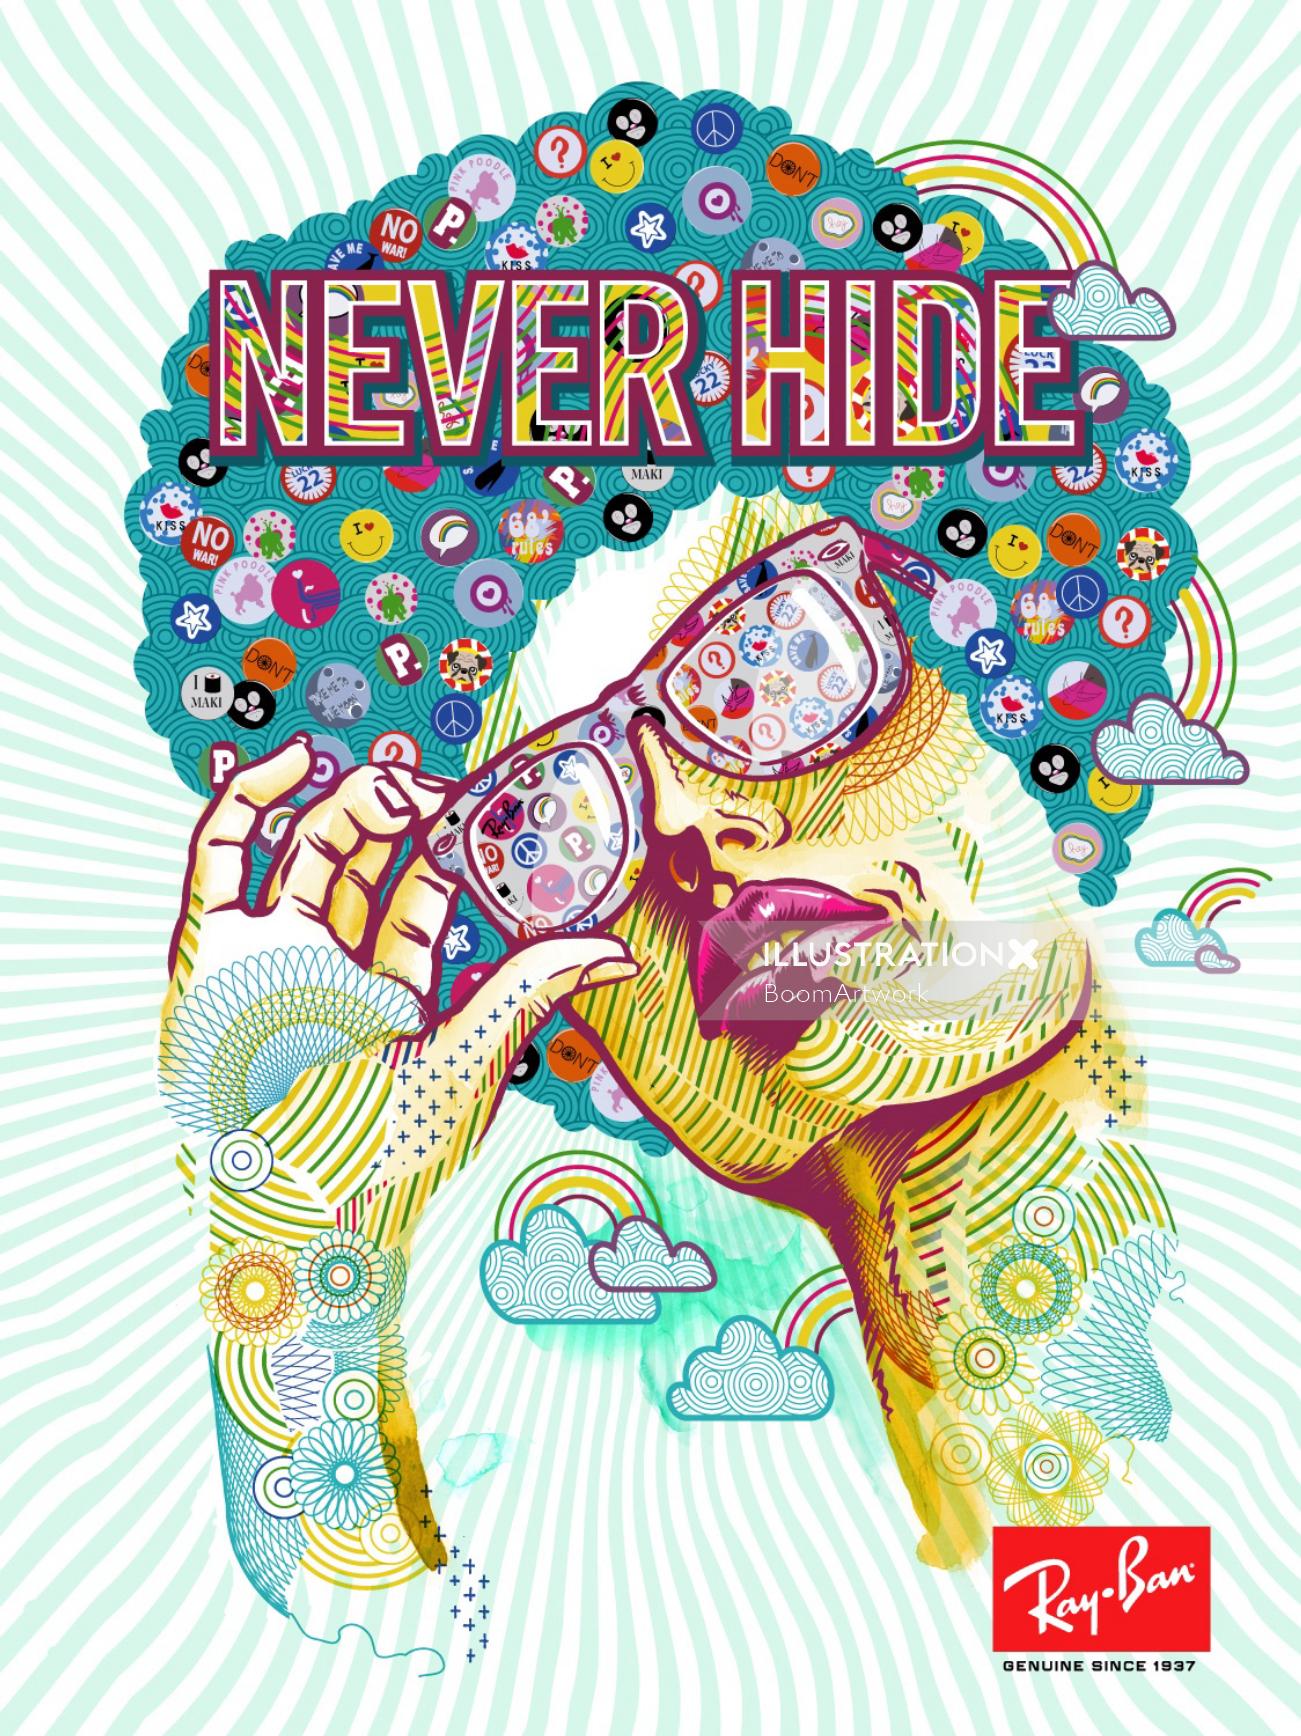 Illustration for Ray Ban ad by BoomArtwork